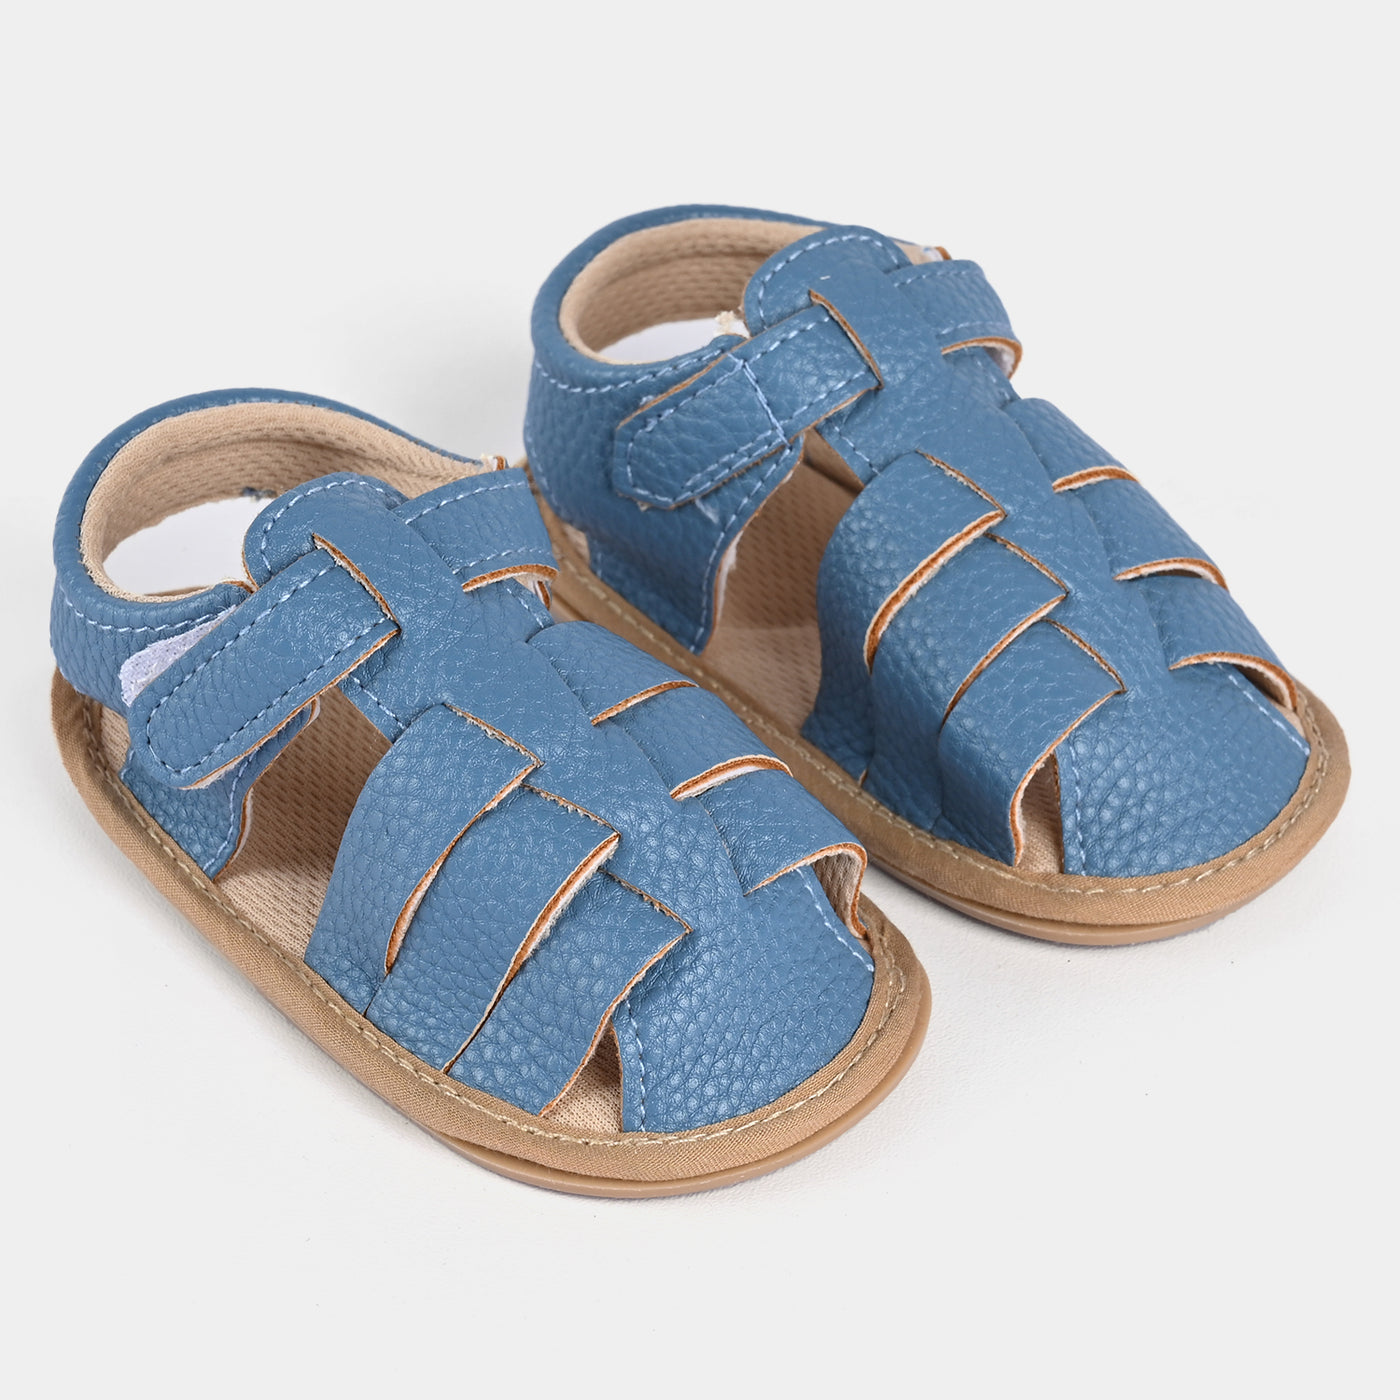 Baby Boys Shoes C-746-Blue